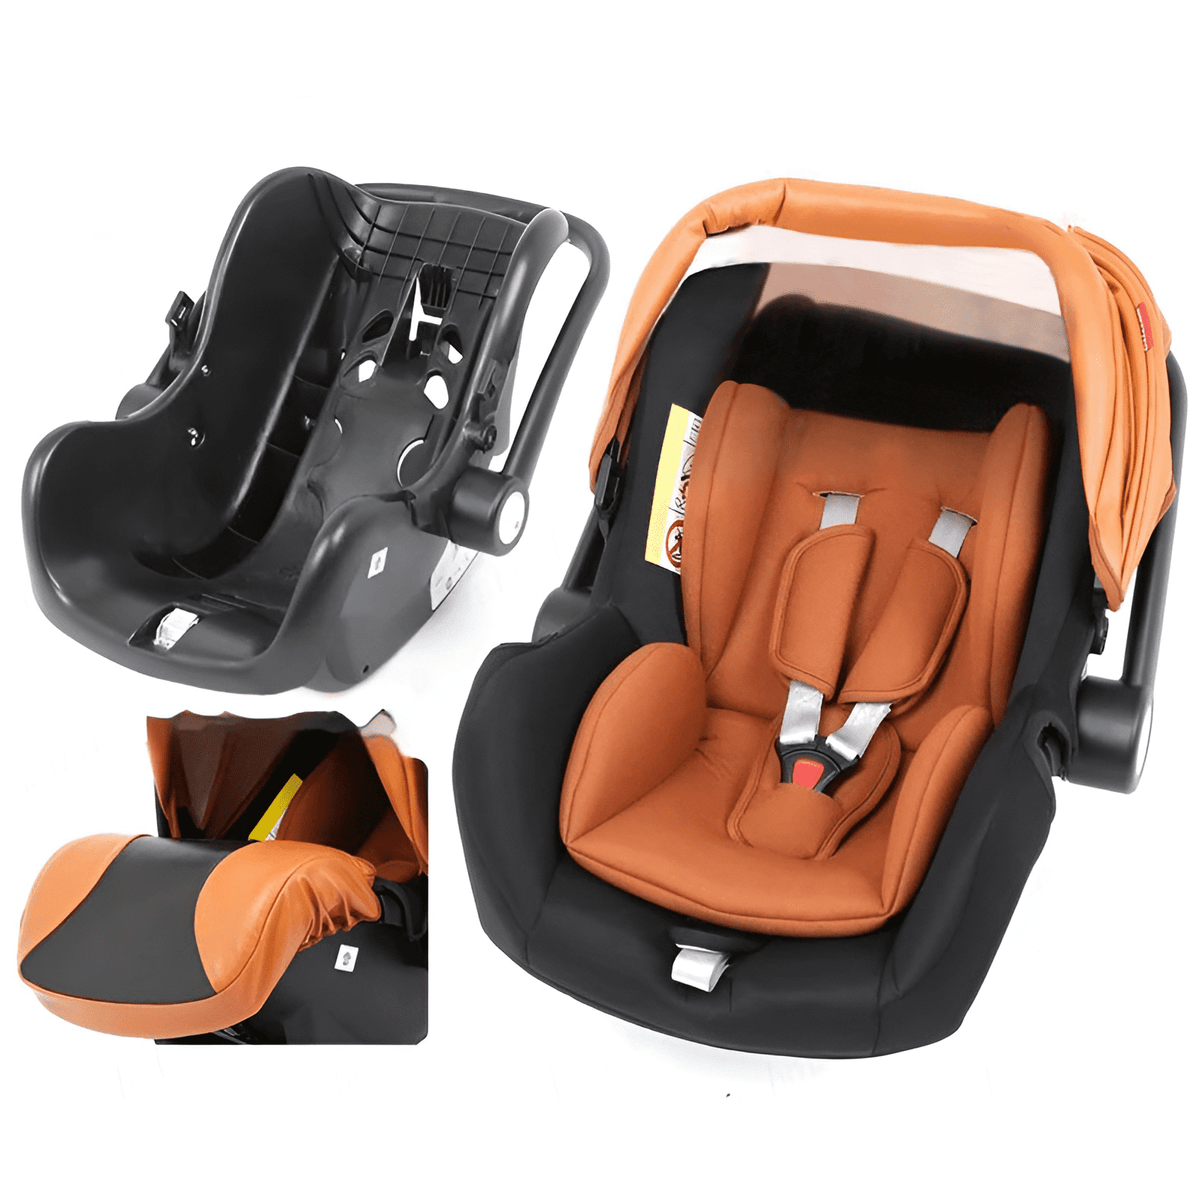 Premium Leather 3-in-1 Baby Stroller